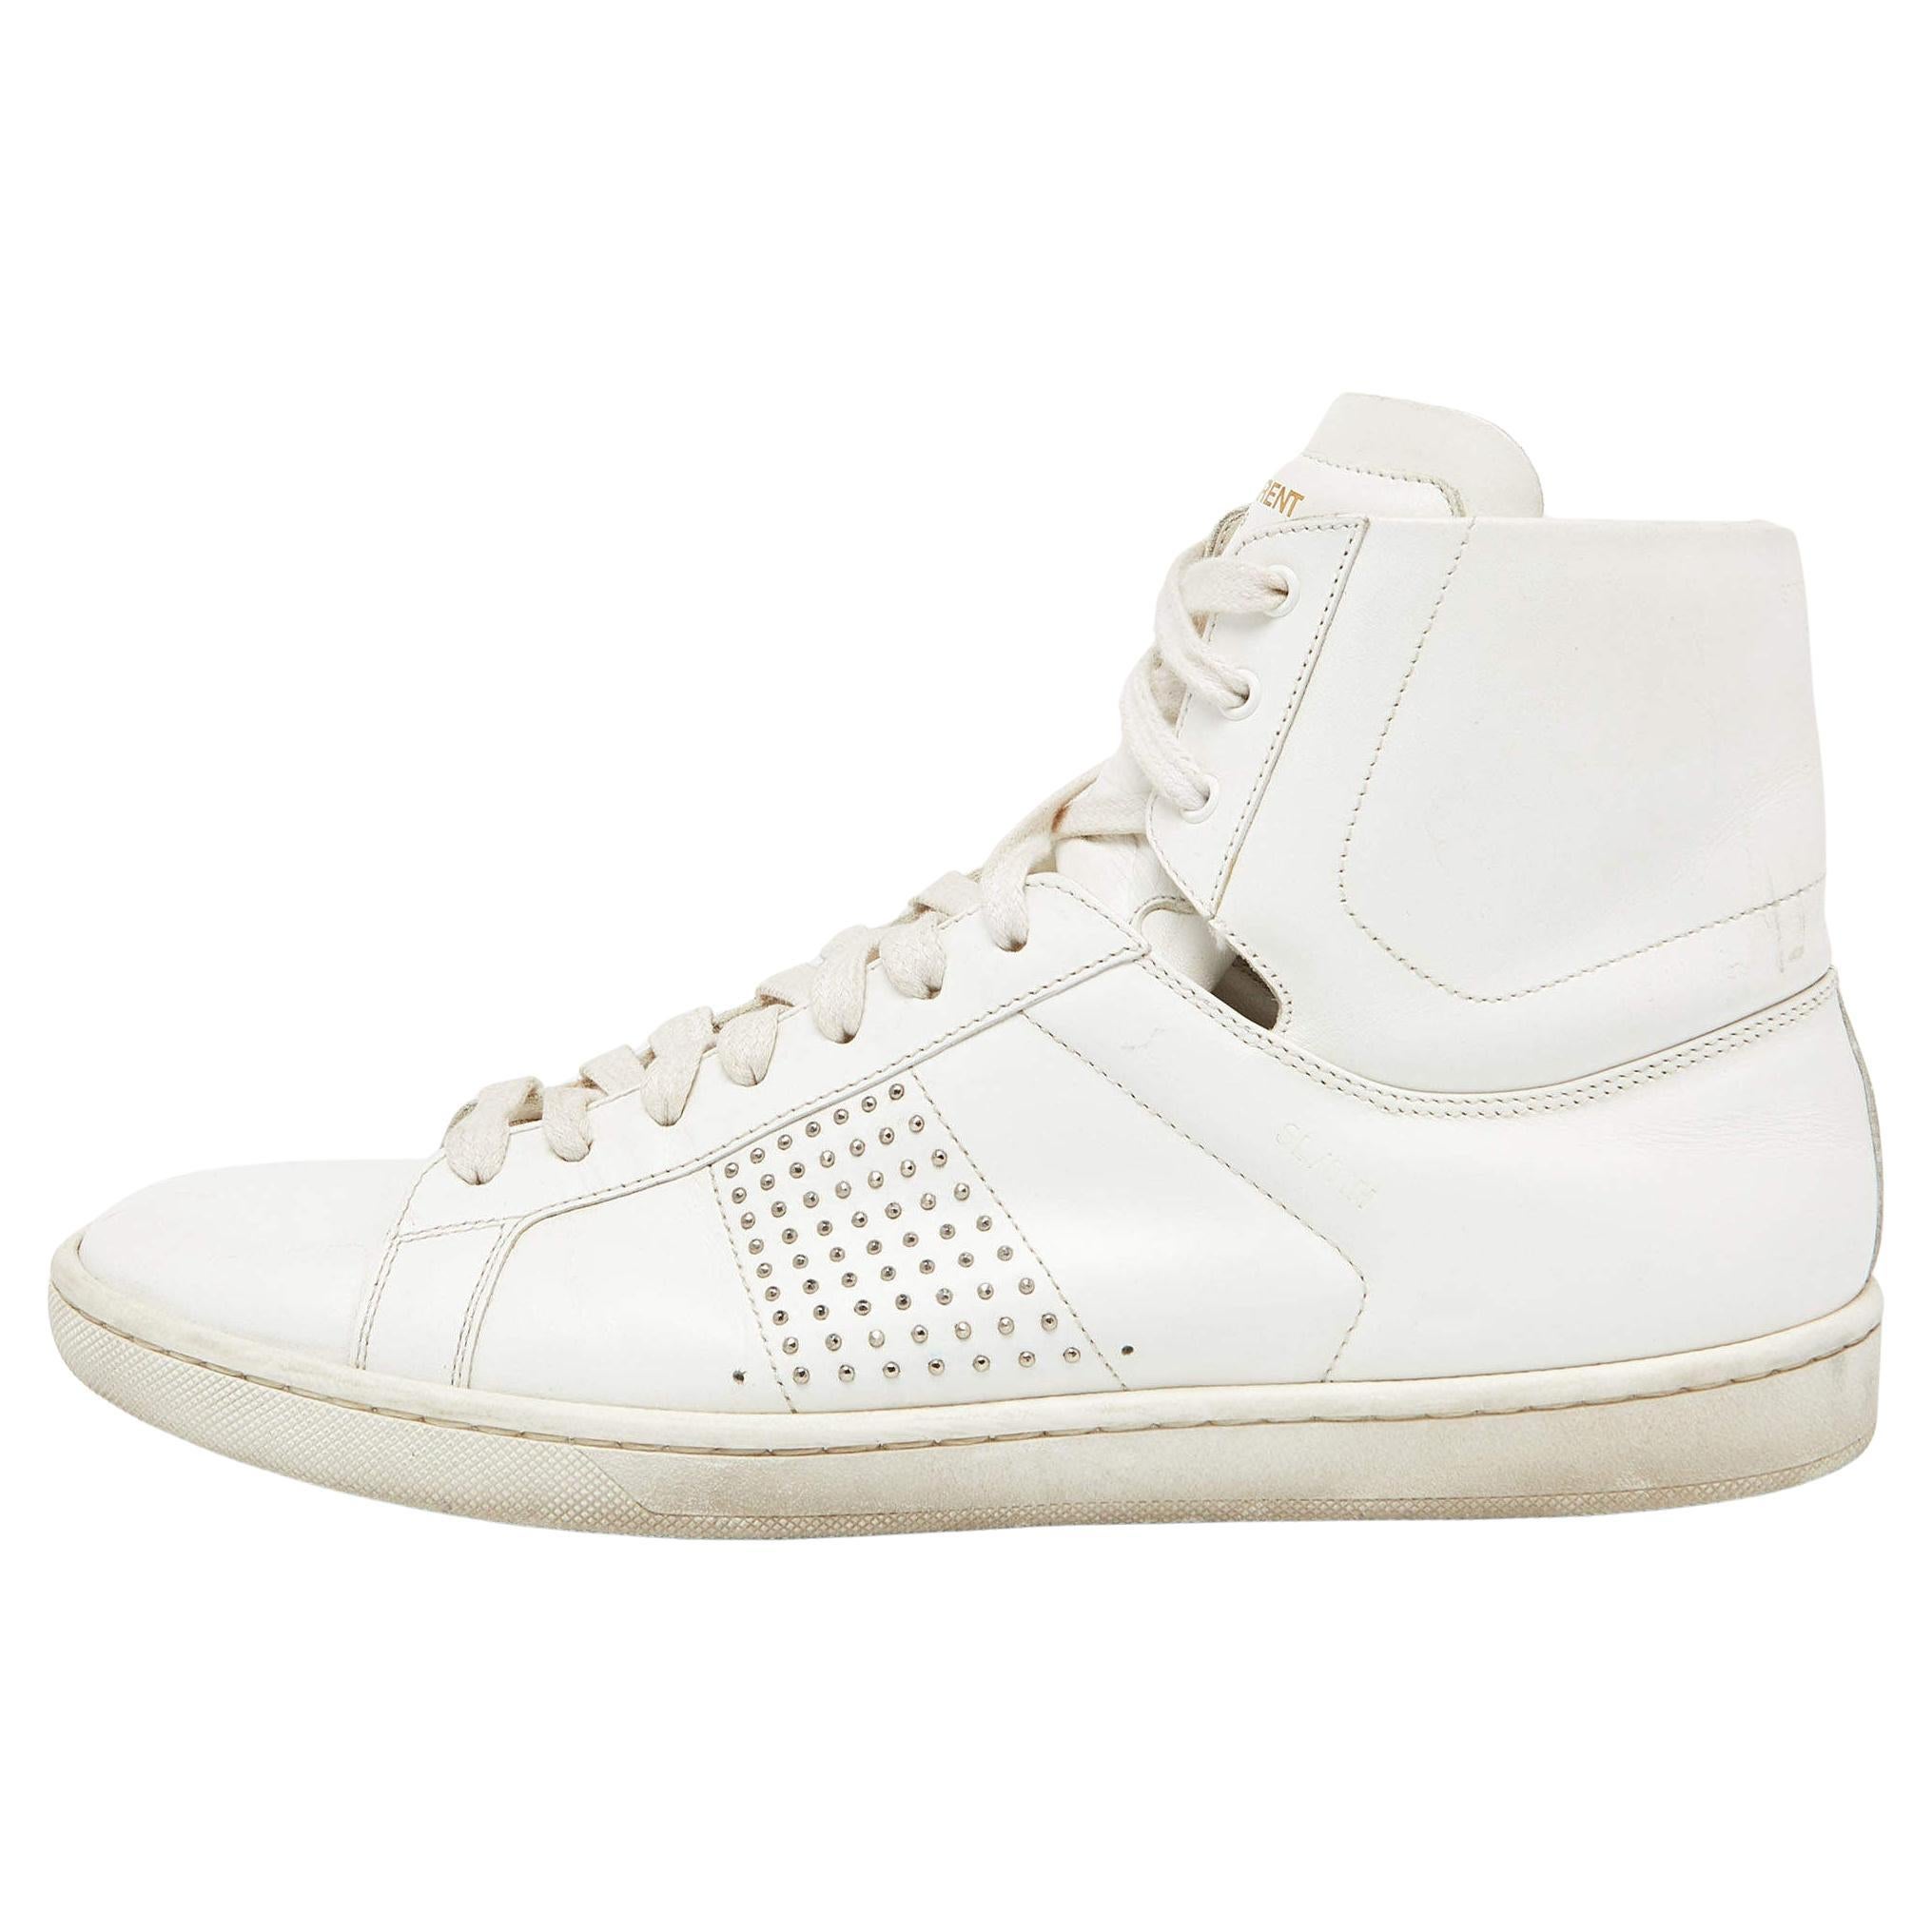 Saint Laurent White Leather Wolly High Top Sneakers Size 40 For Sale